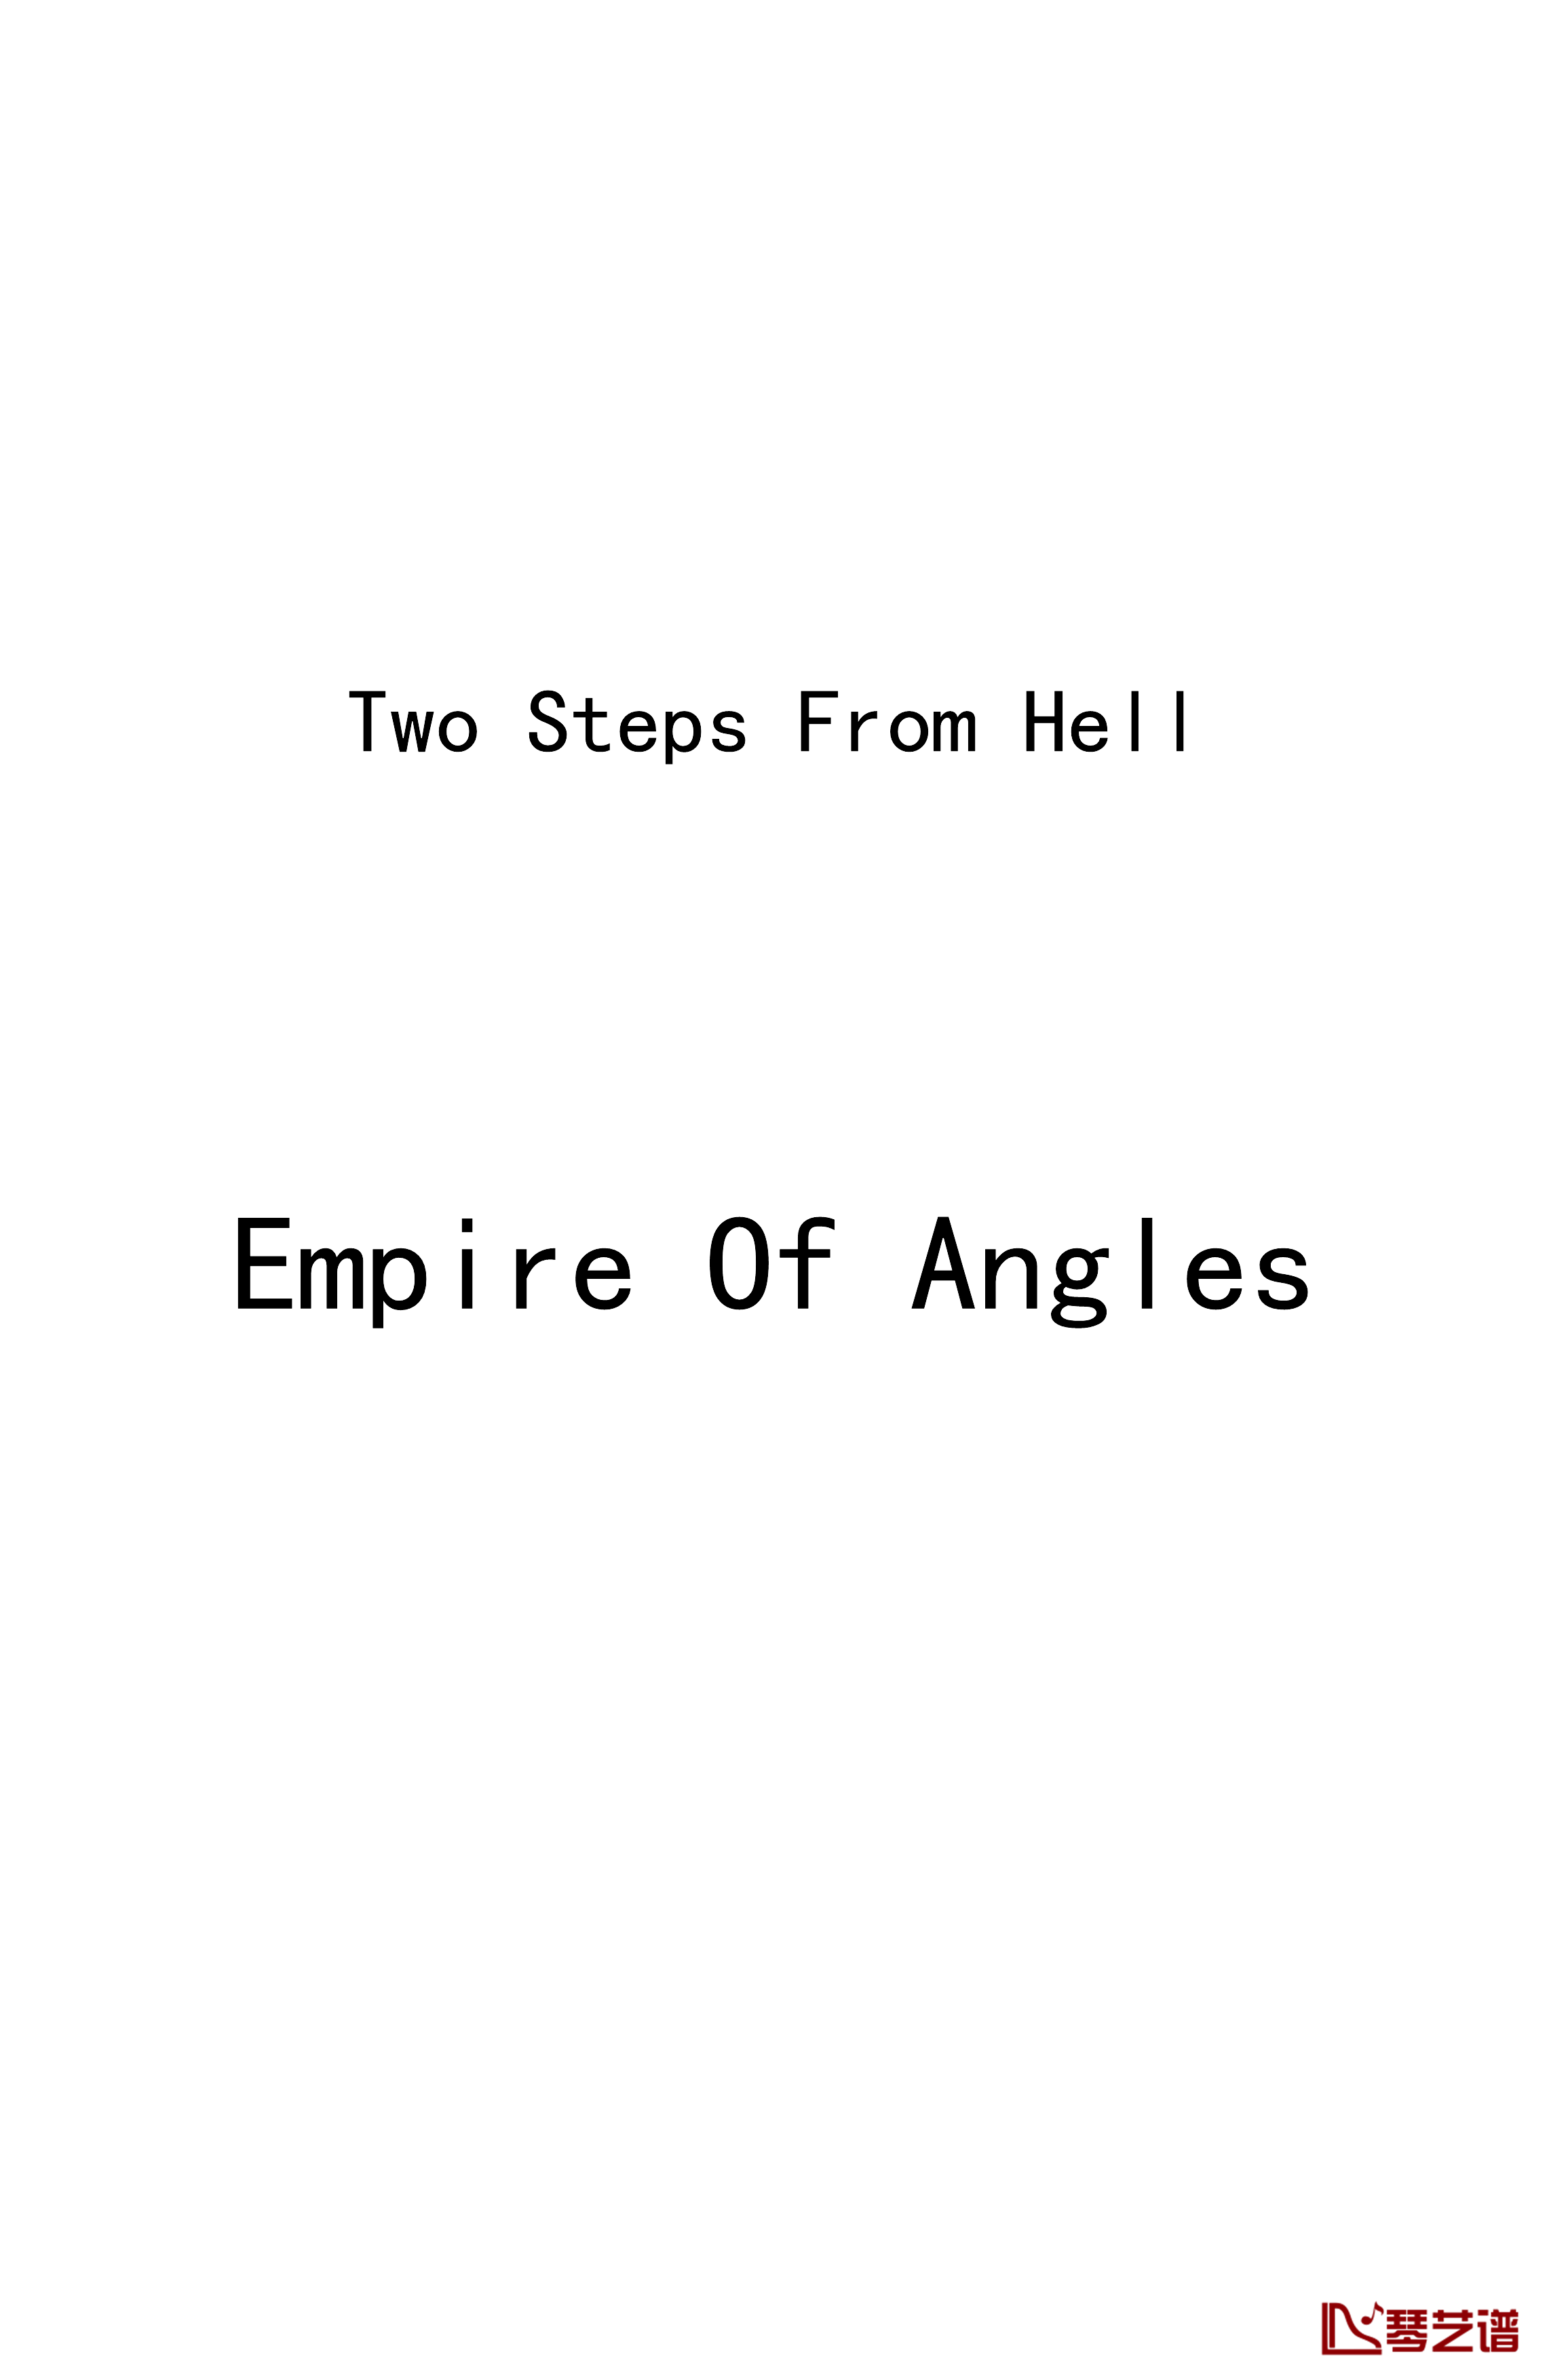 Empire Of Angles钢琴谱-Two Steps From Hell1